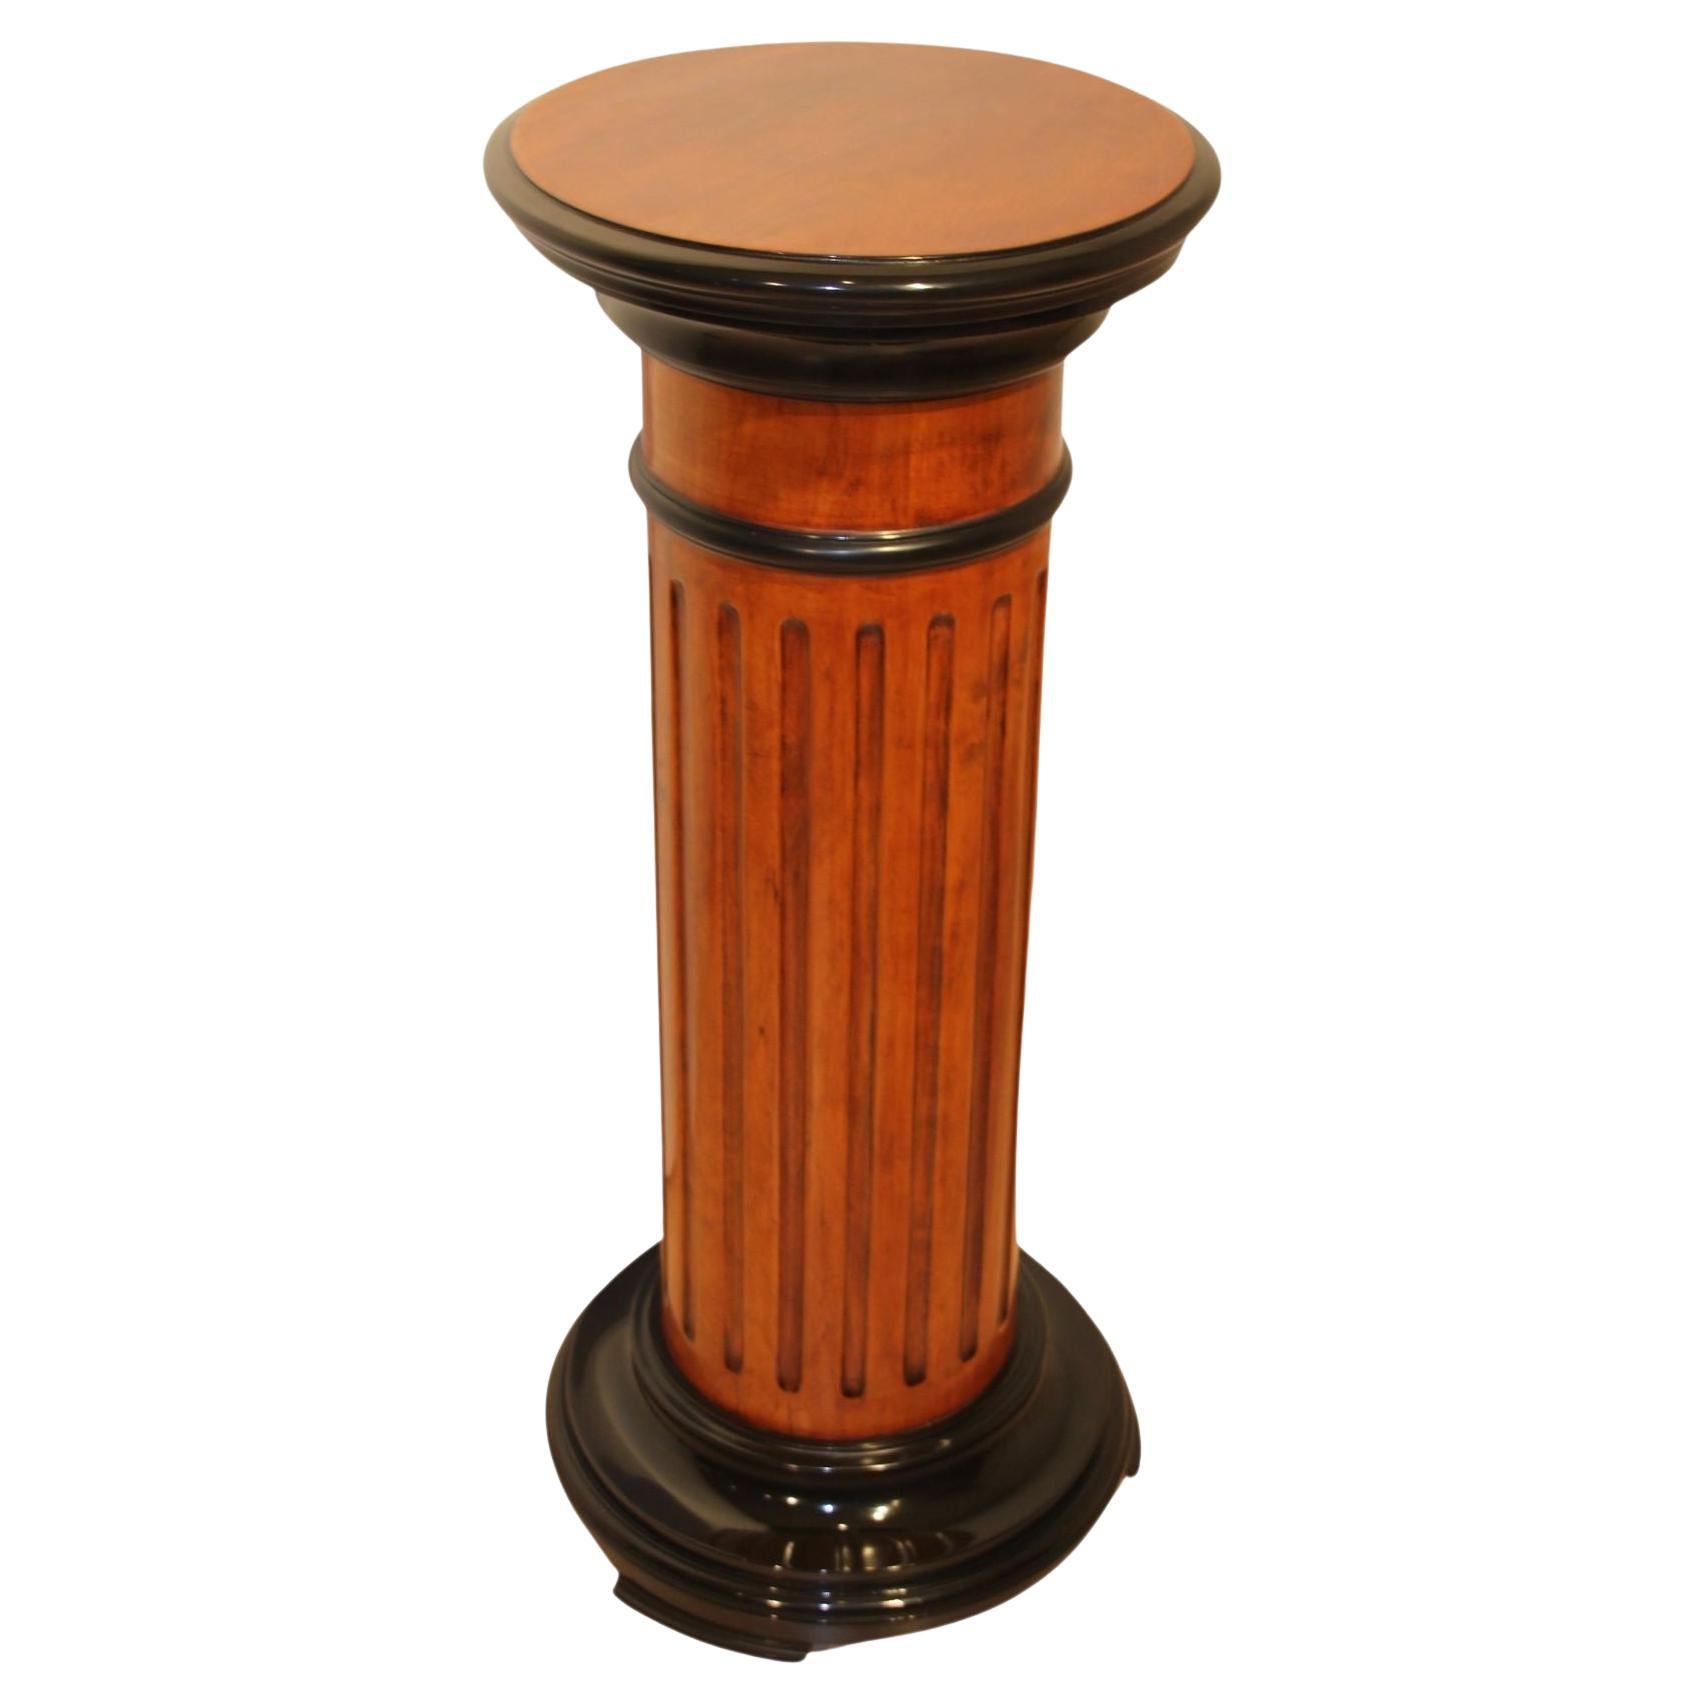 Neoclassical Rotating Pedestal, Beech Wood, French Polished, Germany, Circa 1920